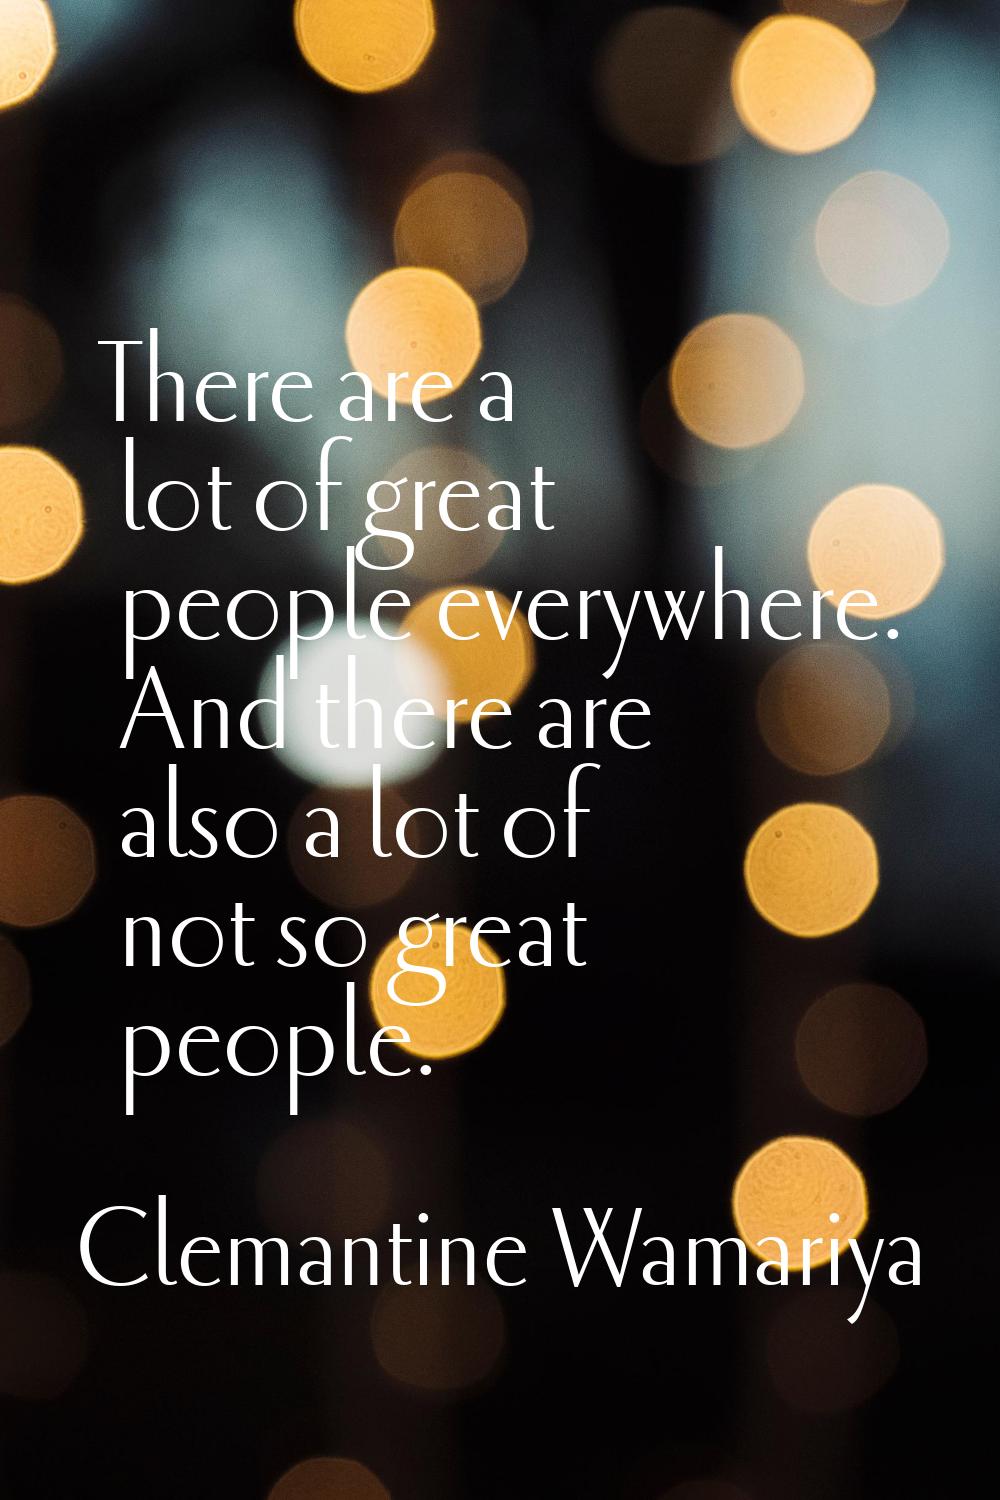 There are a lot of great people everywhere. And there are also a lot of not so great people.